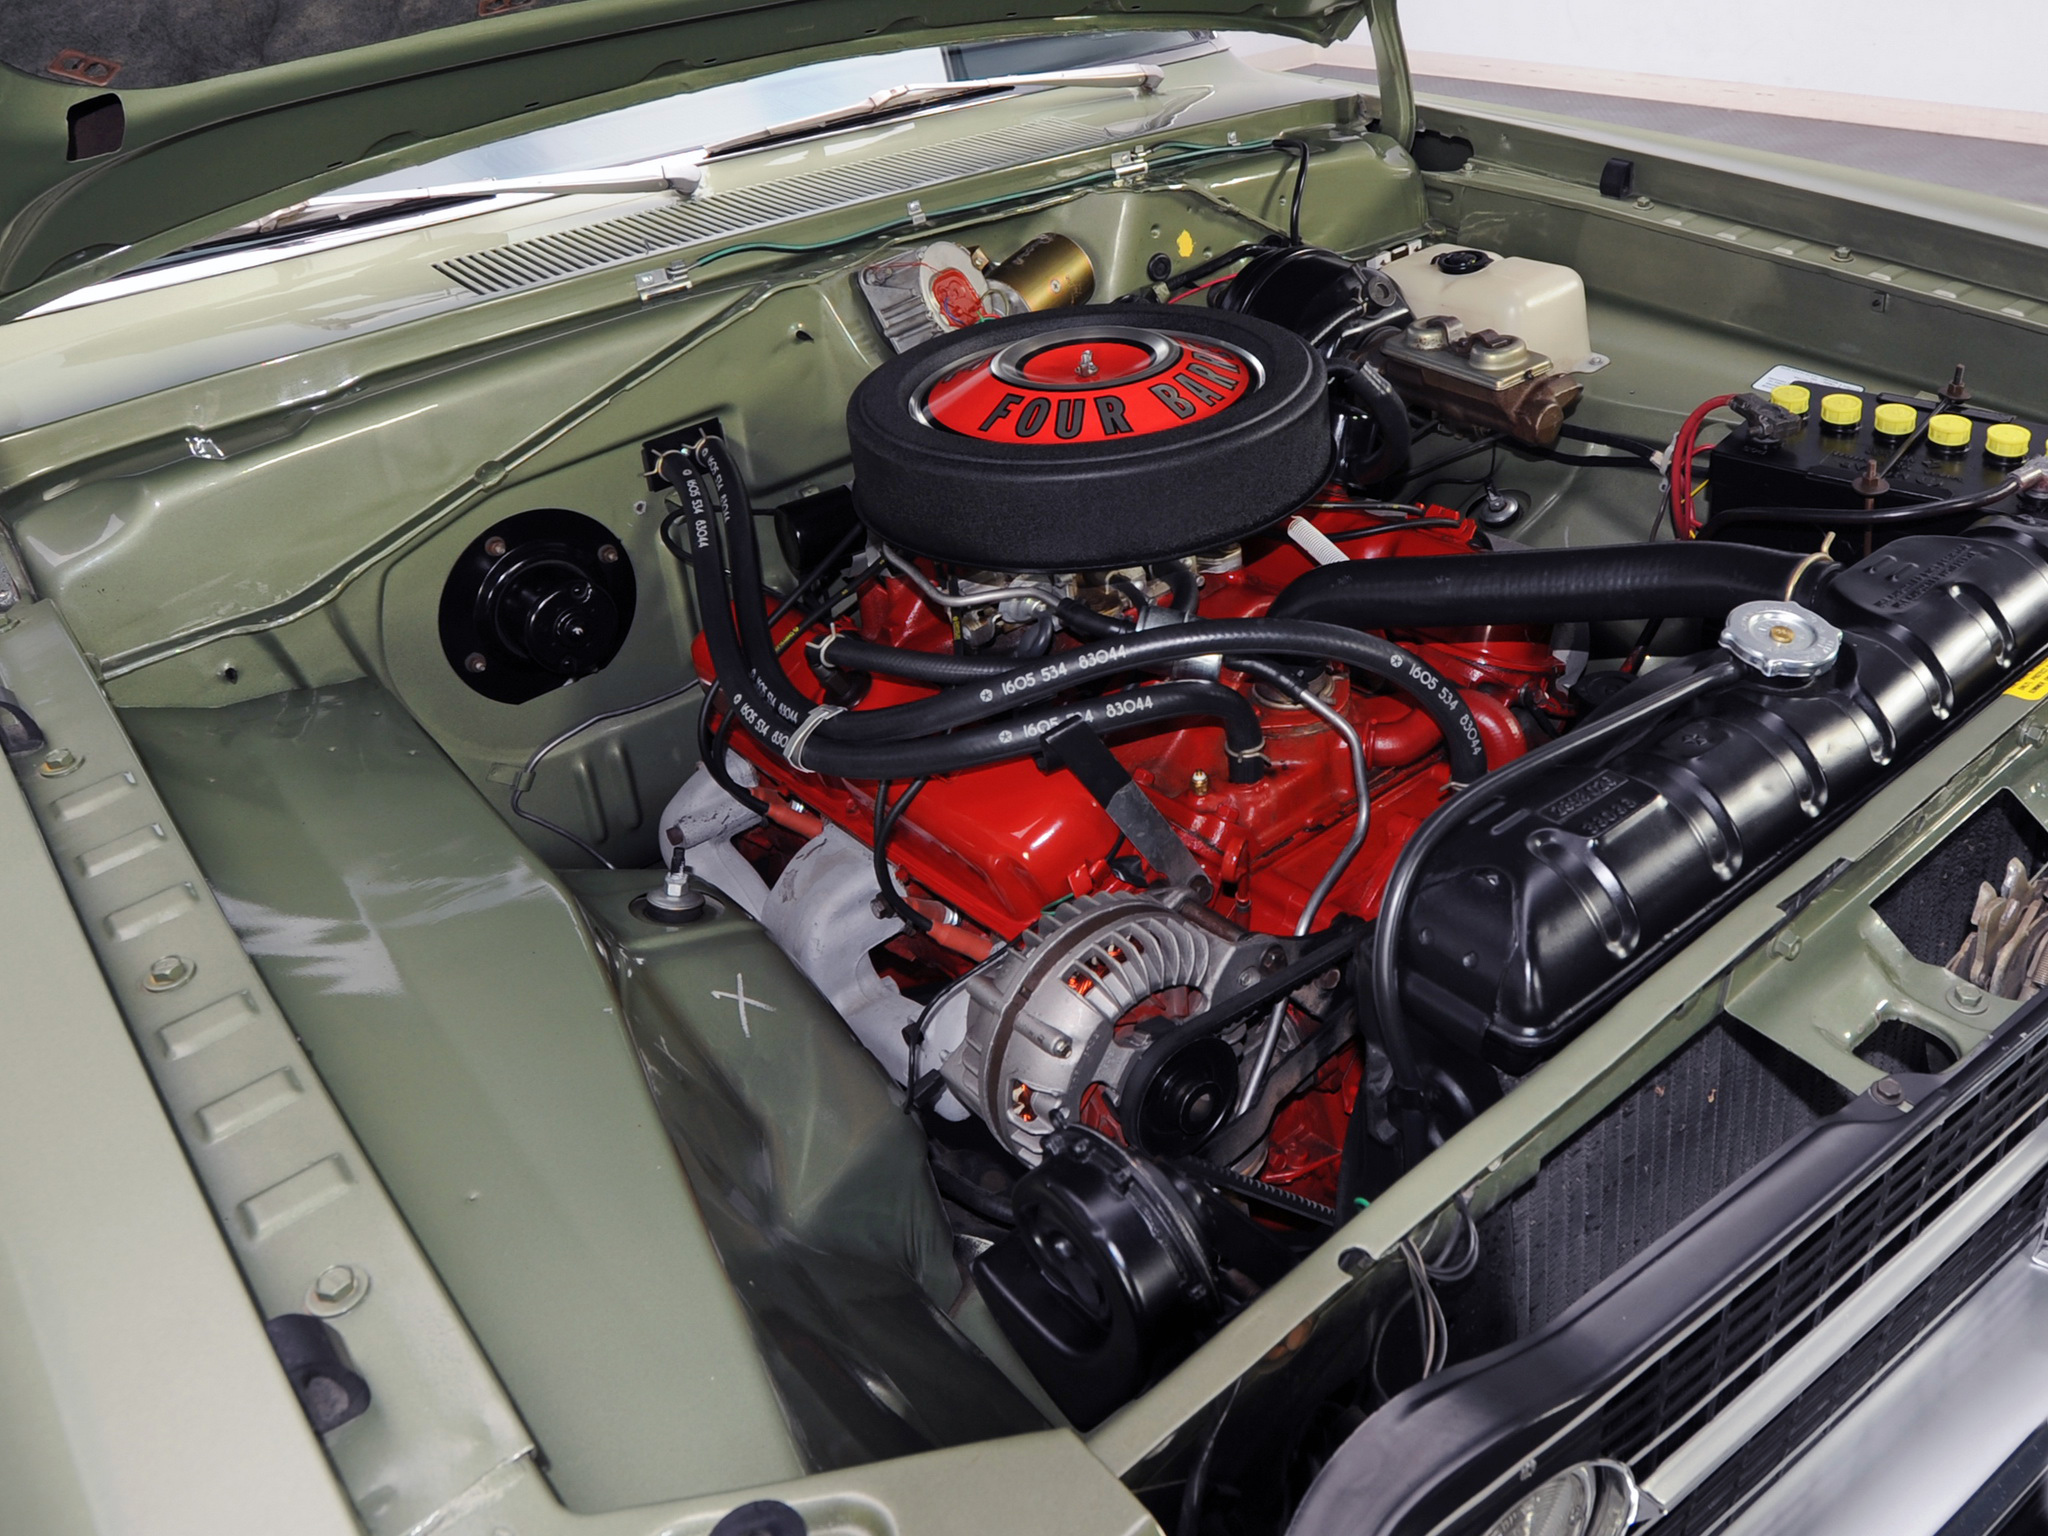 1968, Dodge, Dart, Gts, 340, Convertible, Ls27, Muscle, Classic, Engine, Engines Wallpaper